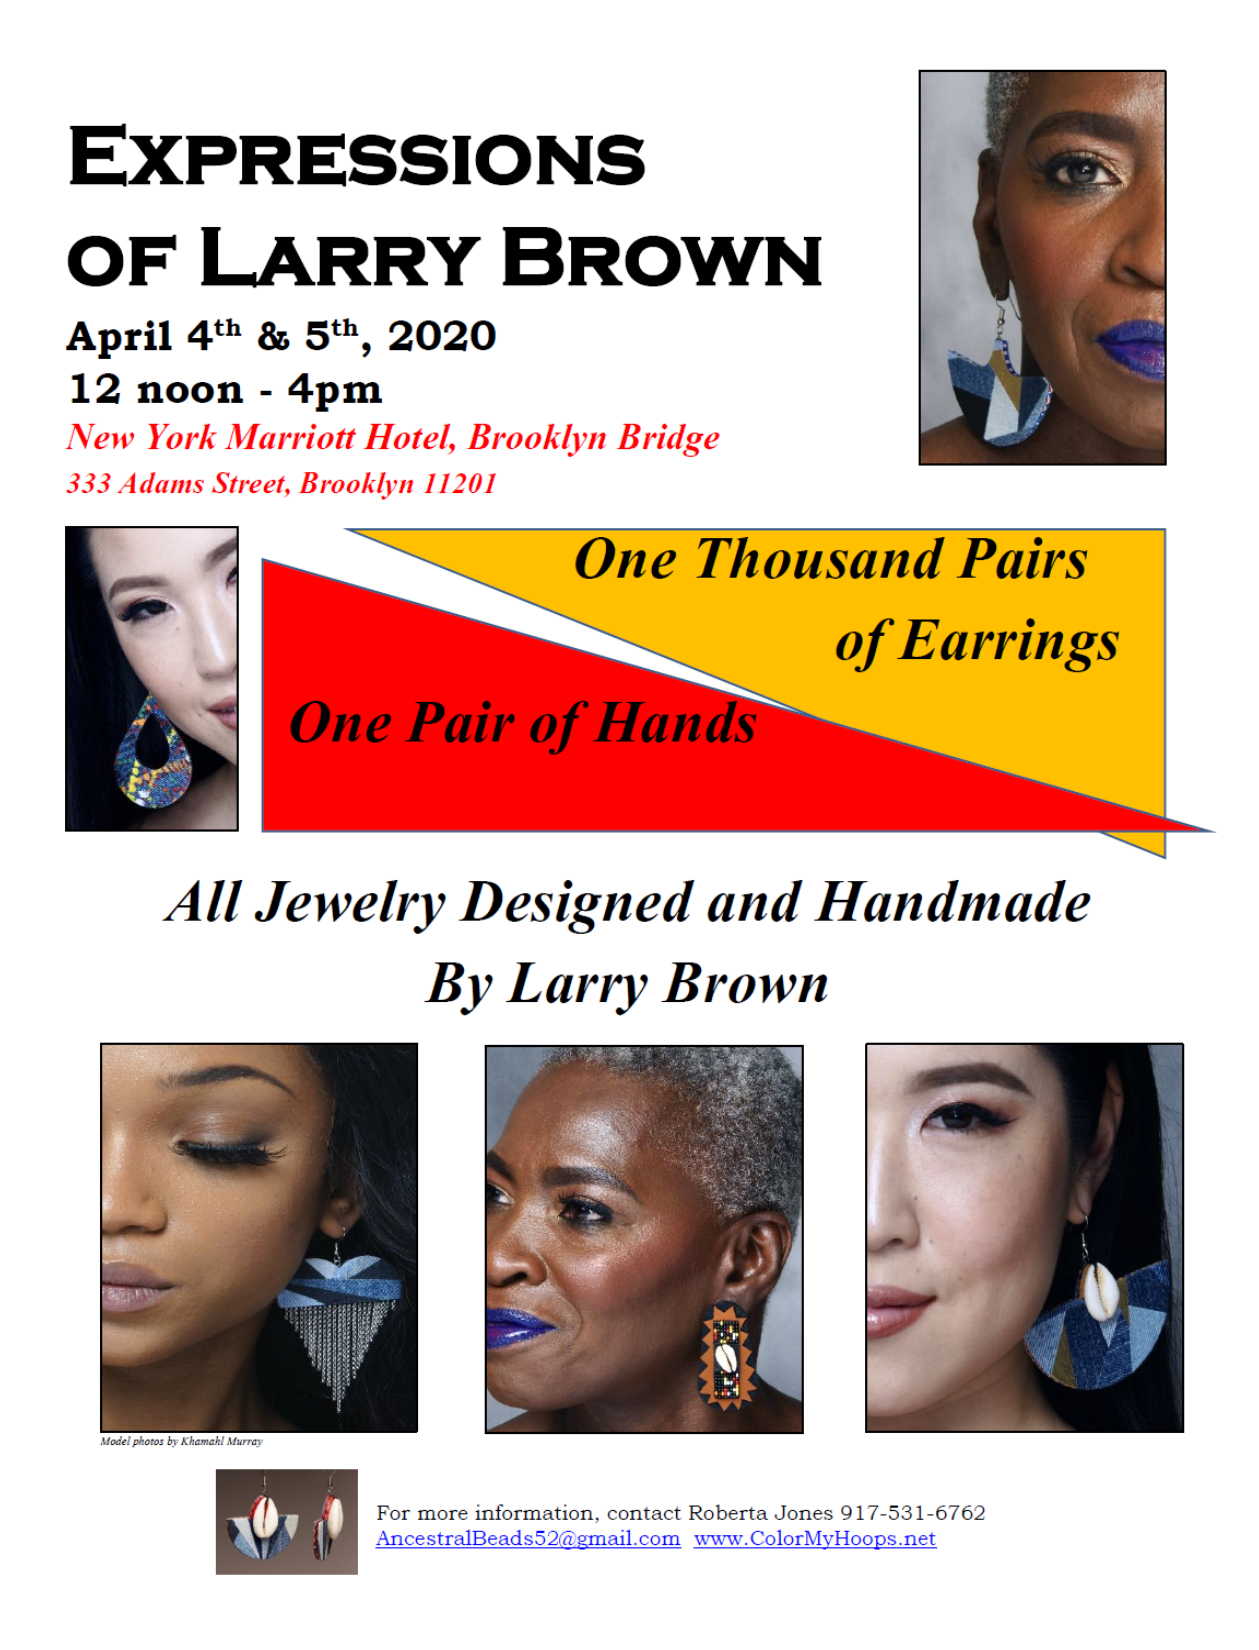 Expressions of Larry Brown Jewelry Show